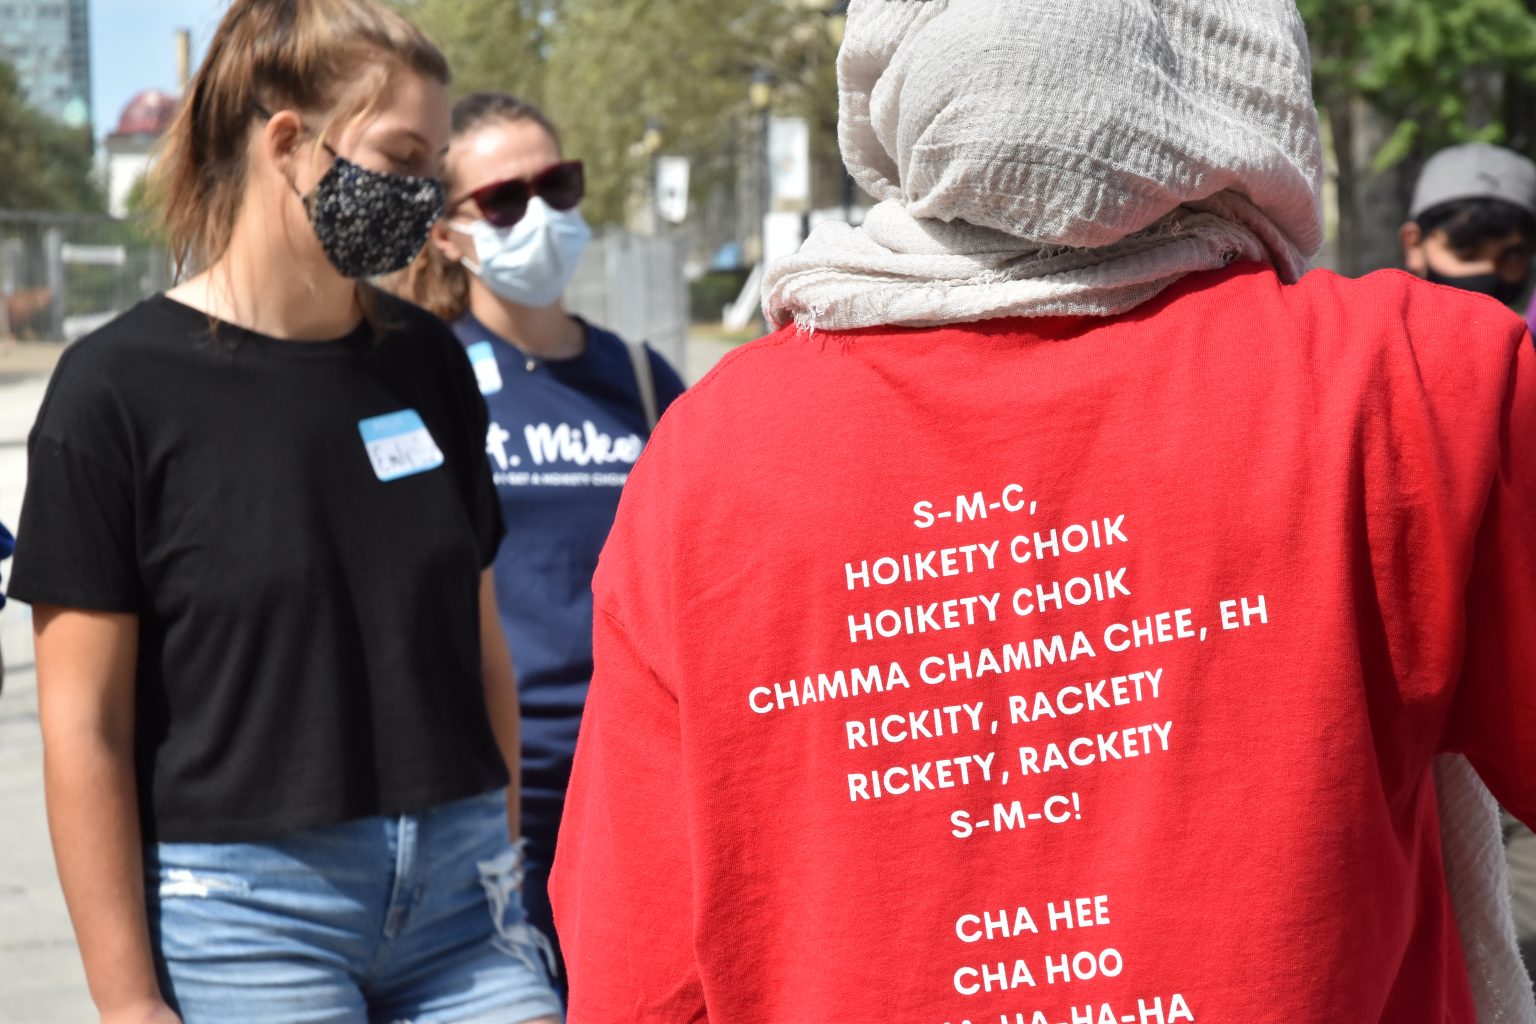 Close up image of a red orientation leader shirt, worn by a leader wearing a headscarf, with the following text visible: "S-M-C, Hoikety Choik Hoikety Choik Chamma Chamma Chee, Eh Rickity, Rackety Rickity, Rackety S-M-C! Cha Hee Cha Hoo…"